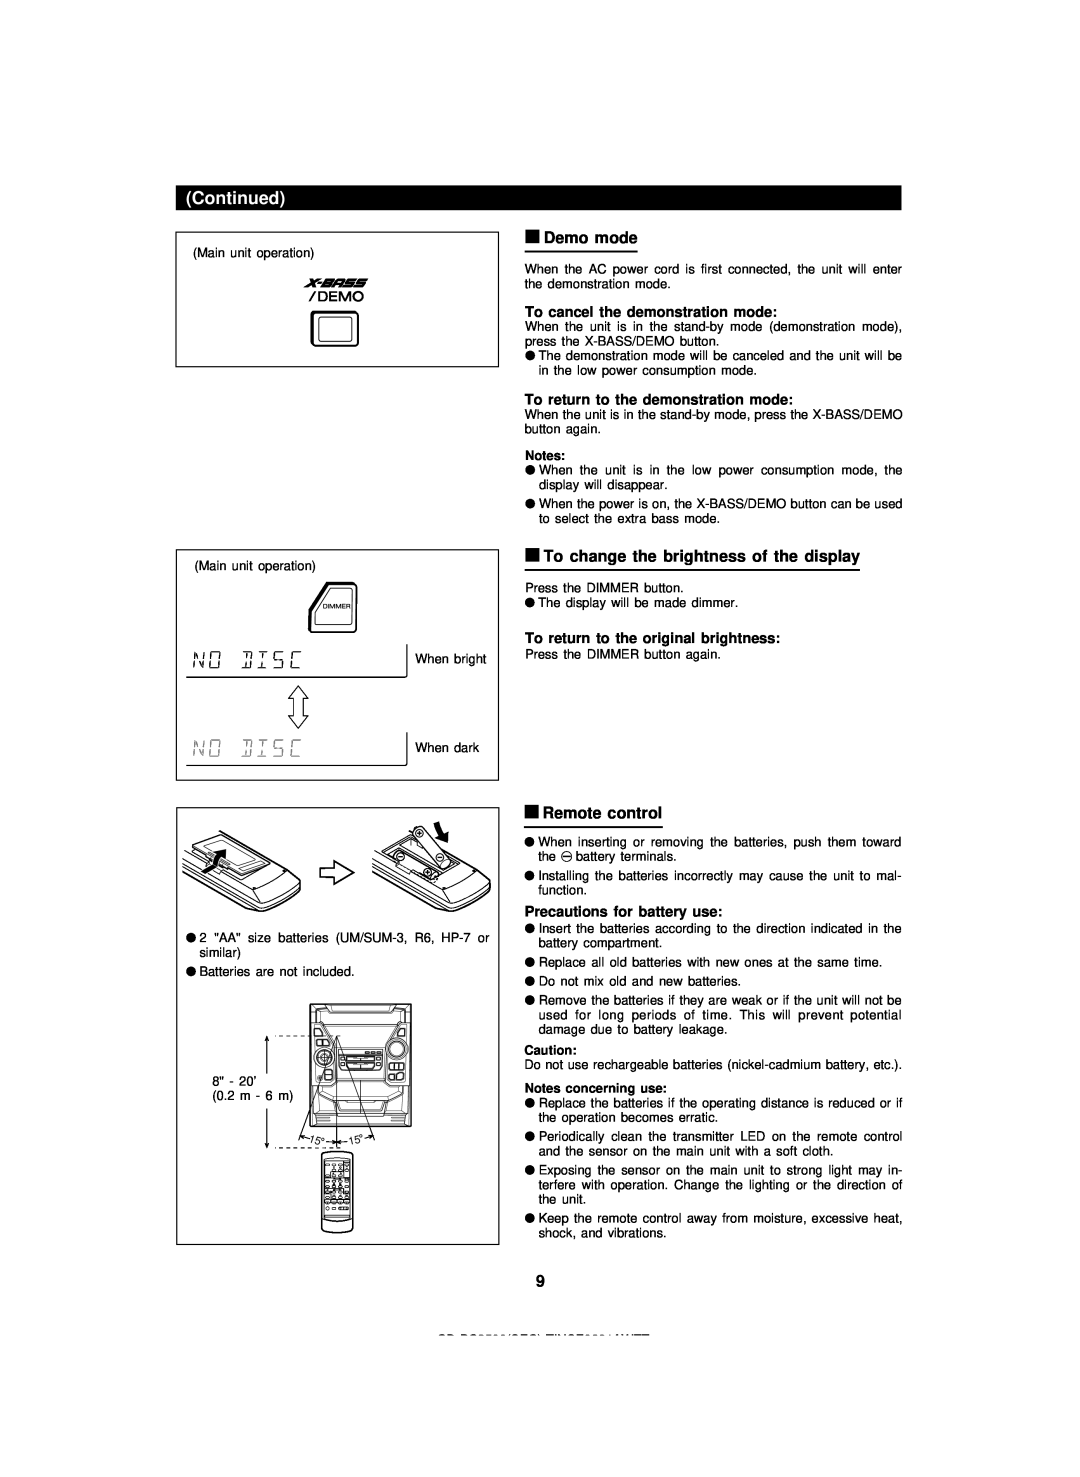 Sharp CD-PC3500 operation manual Continued, To cancel the demonstration mode, To return to the demonstration mode 